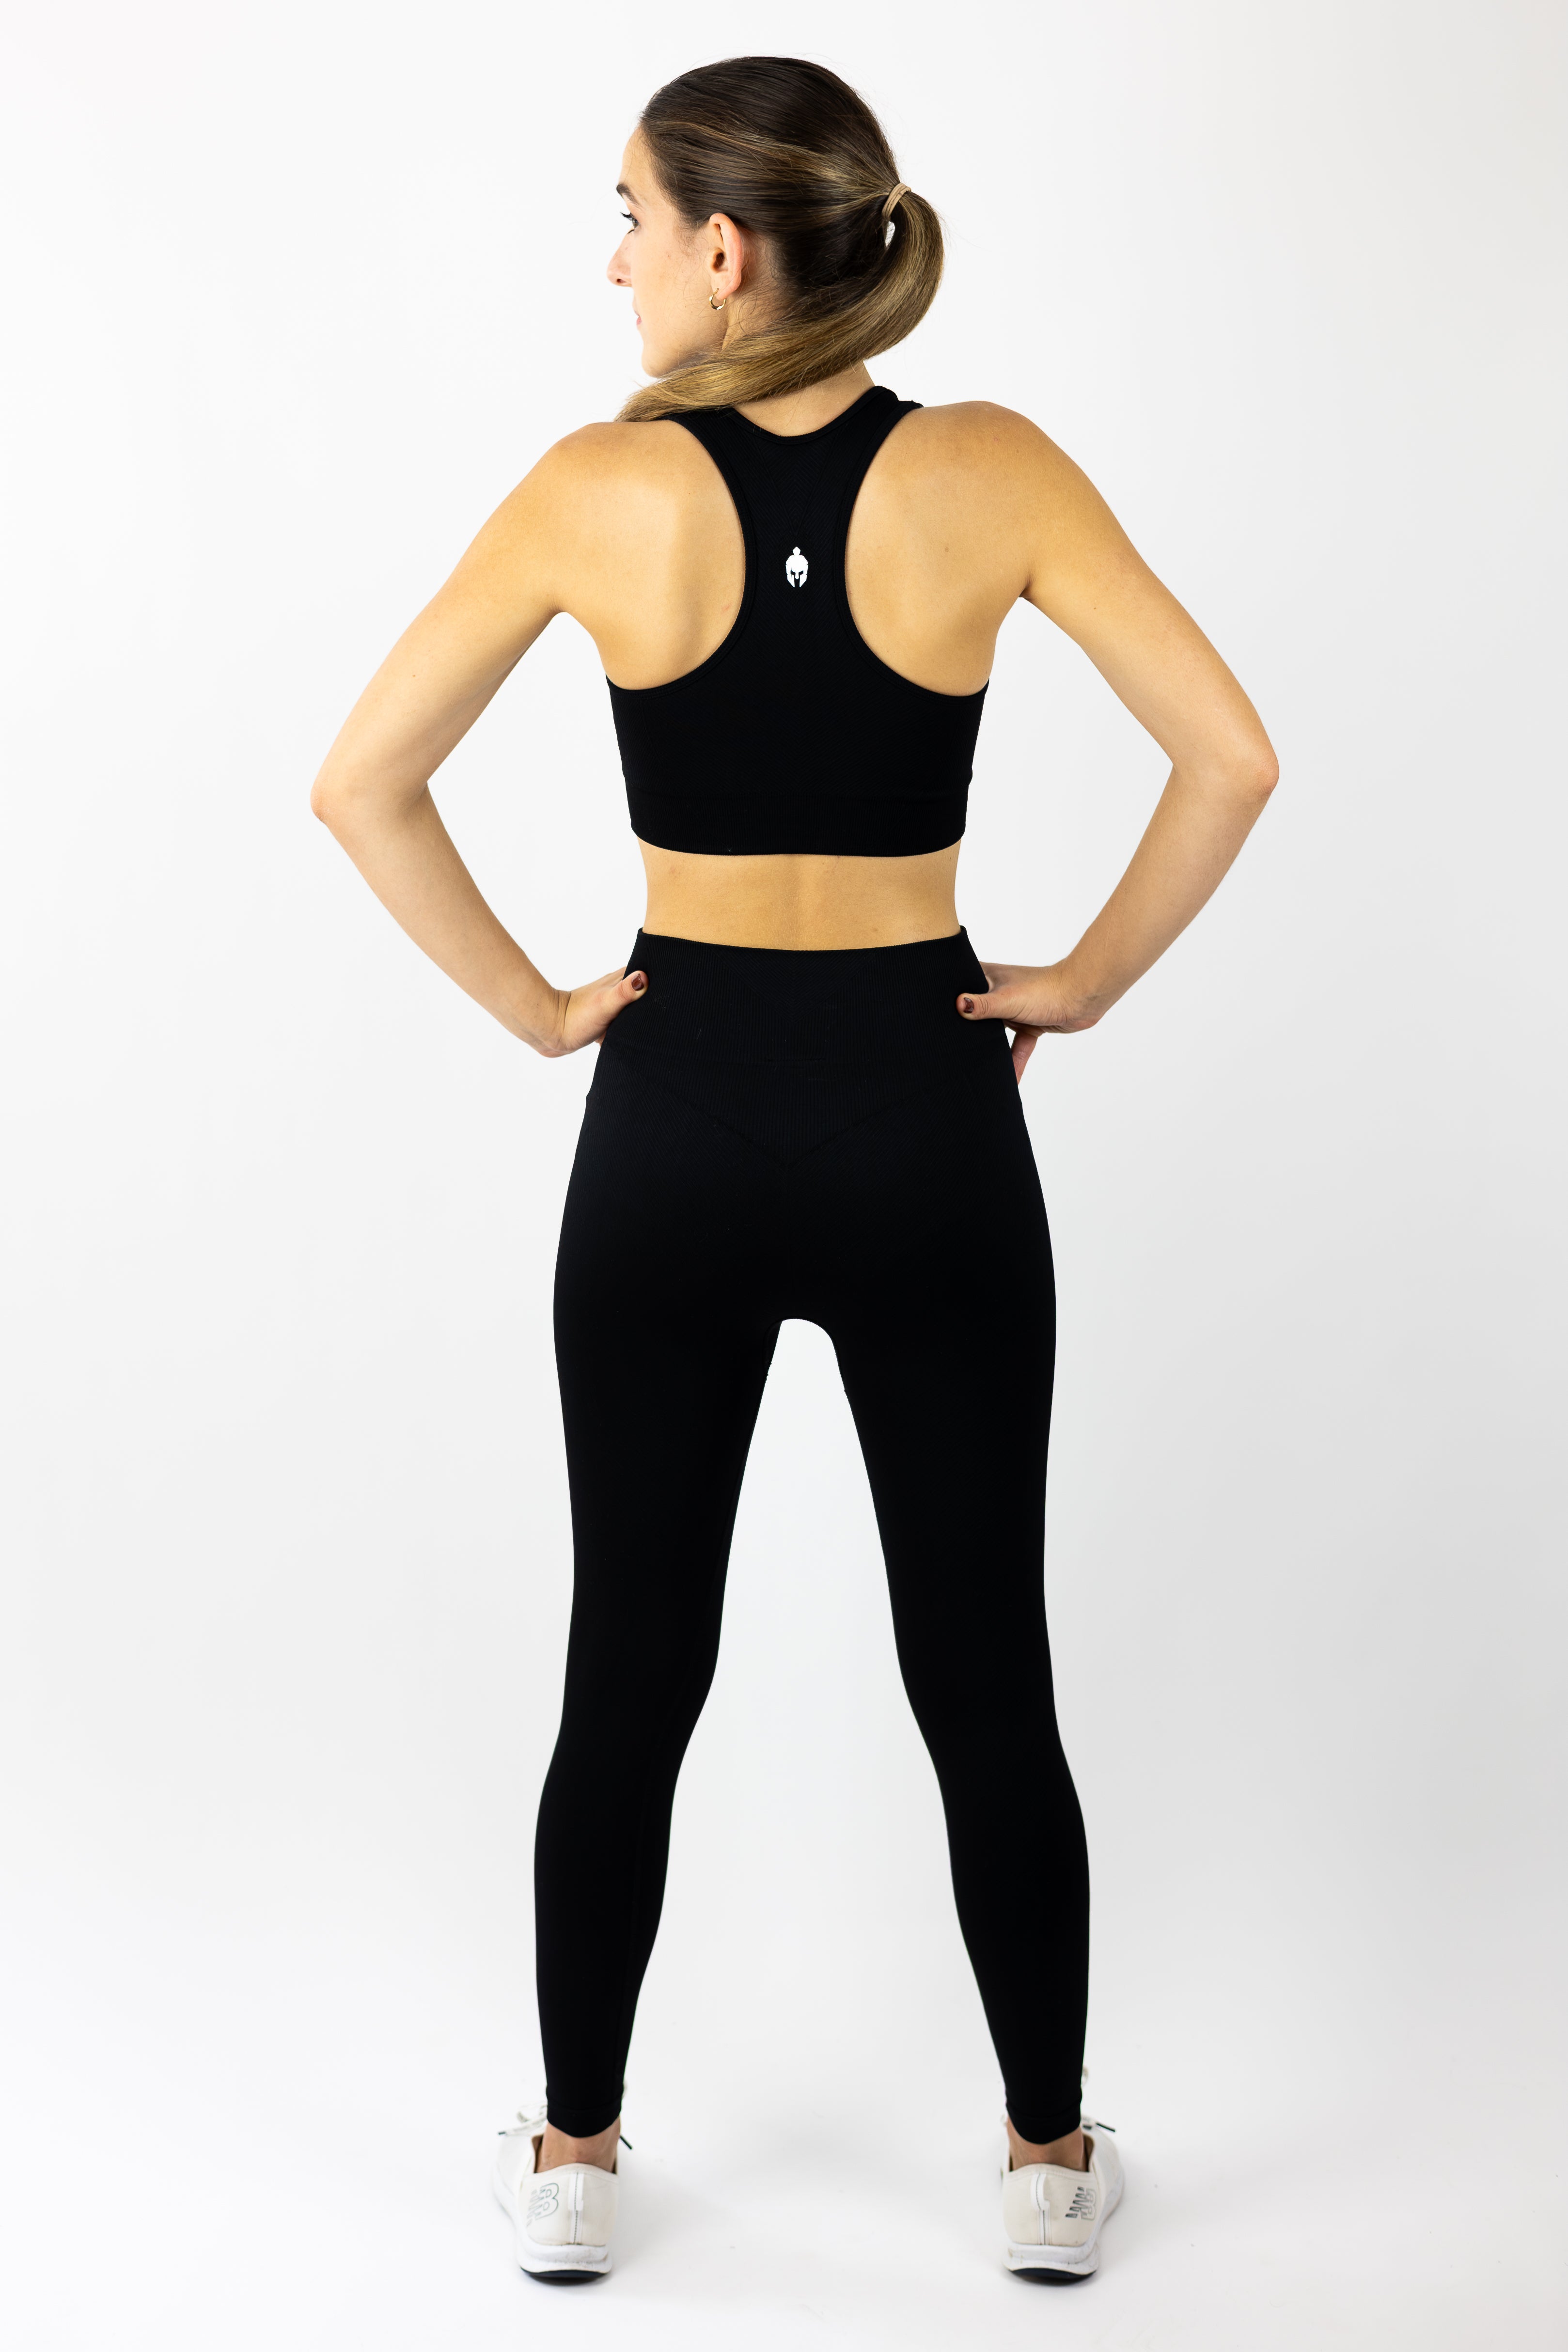 rear view of woman modeling Strength of One black yoga pants and sports bra seamless set